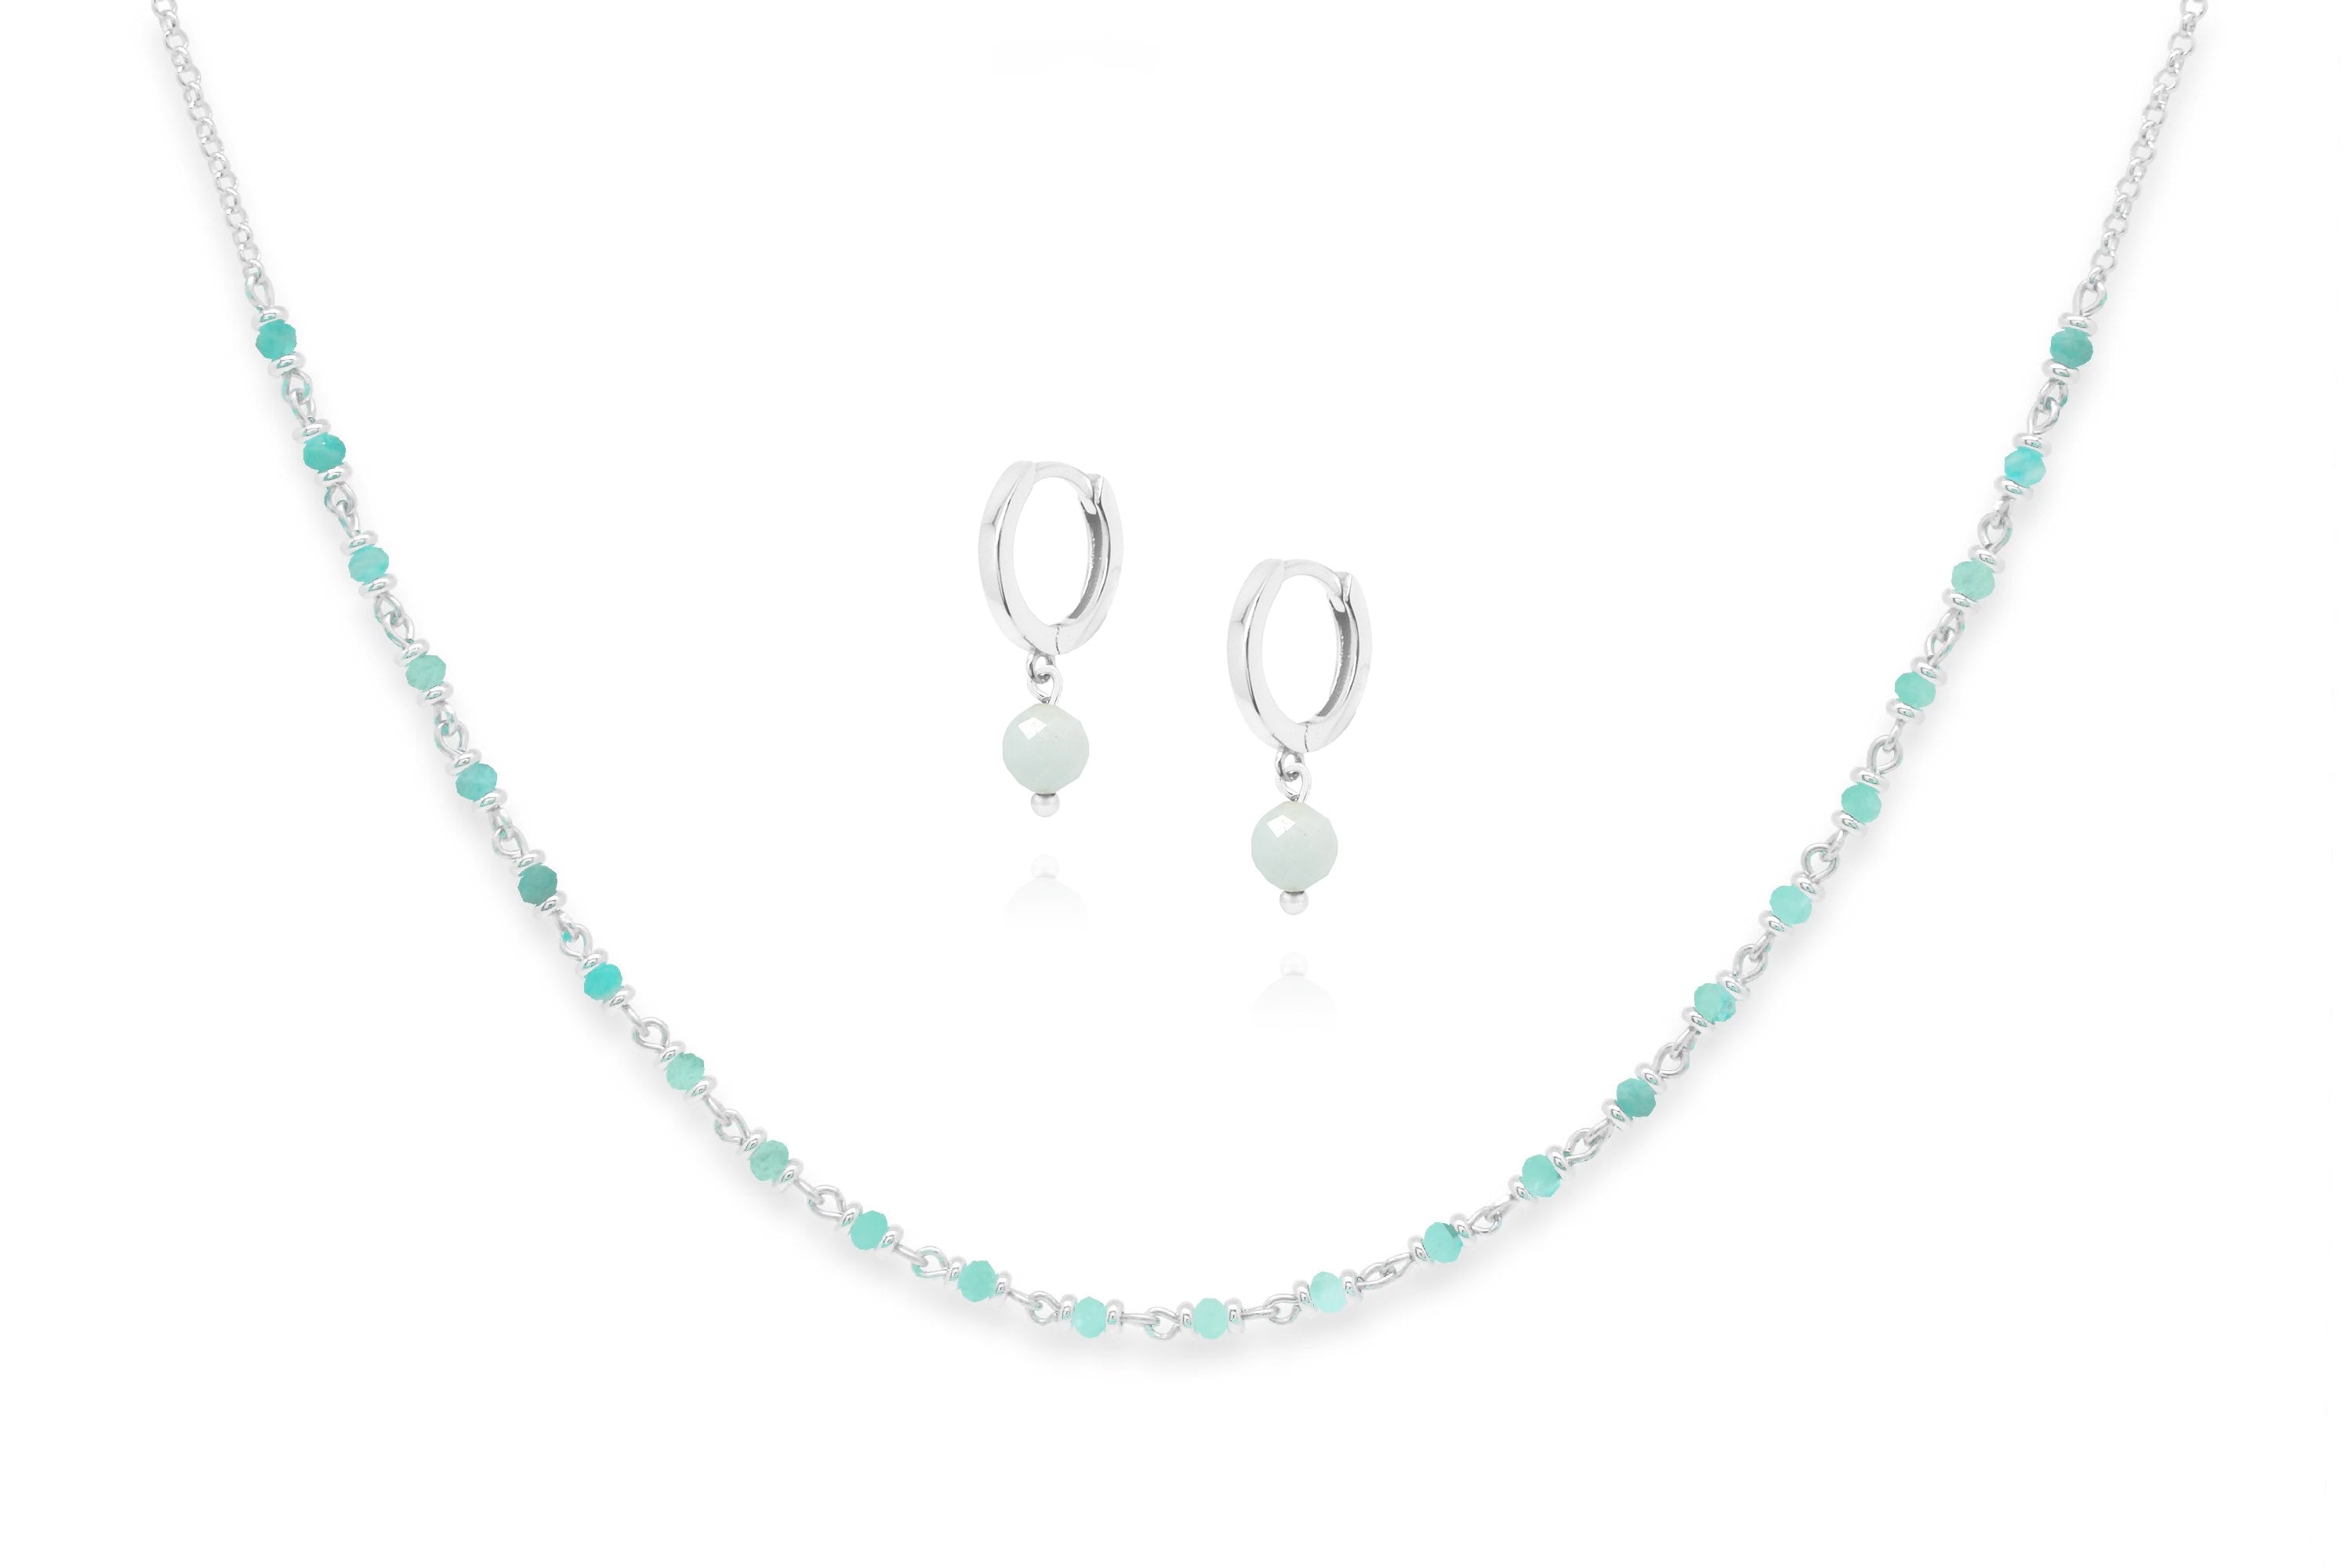 Panacea Silver Necklace & Earring Gift Set